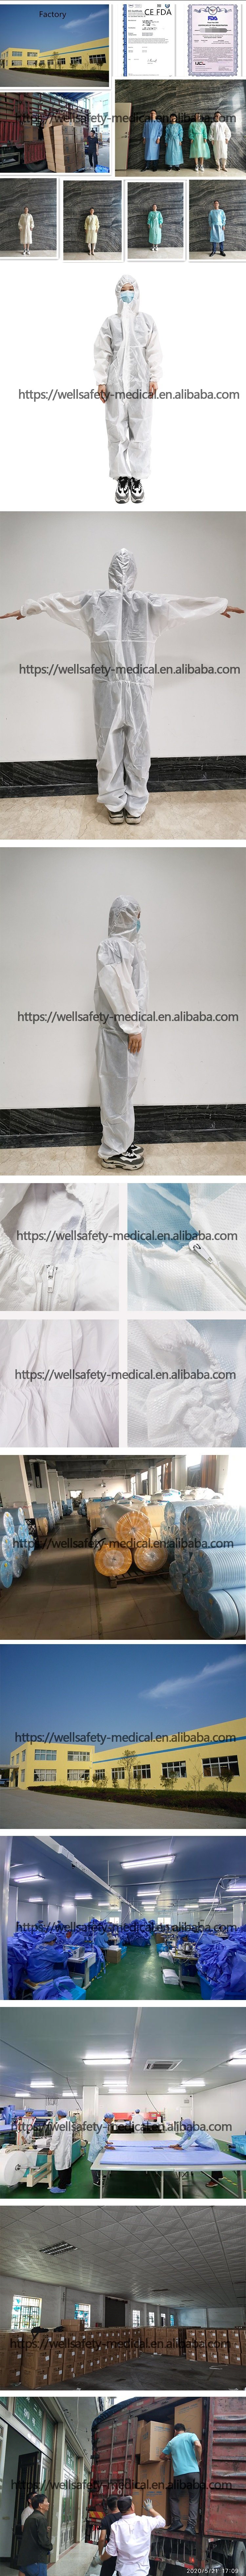 OEM Price PPE Coverall Disposable SMS/PP/PE/ Nonwoven Waterproof Isolation Gown Safety Xxxl Size Protective Clothing FDA Ce ANSI/AAMI PB70 Type 5 6